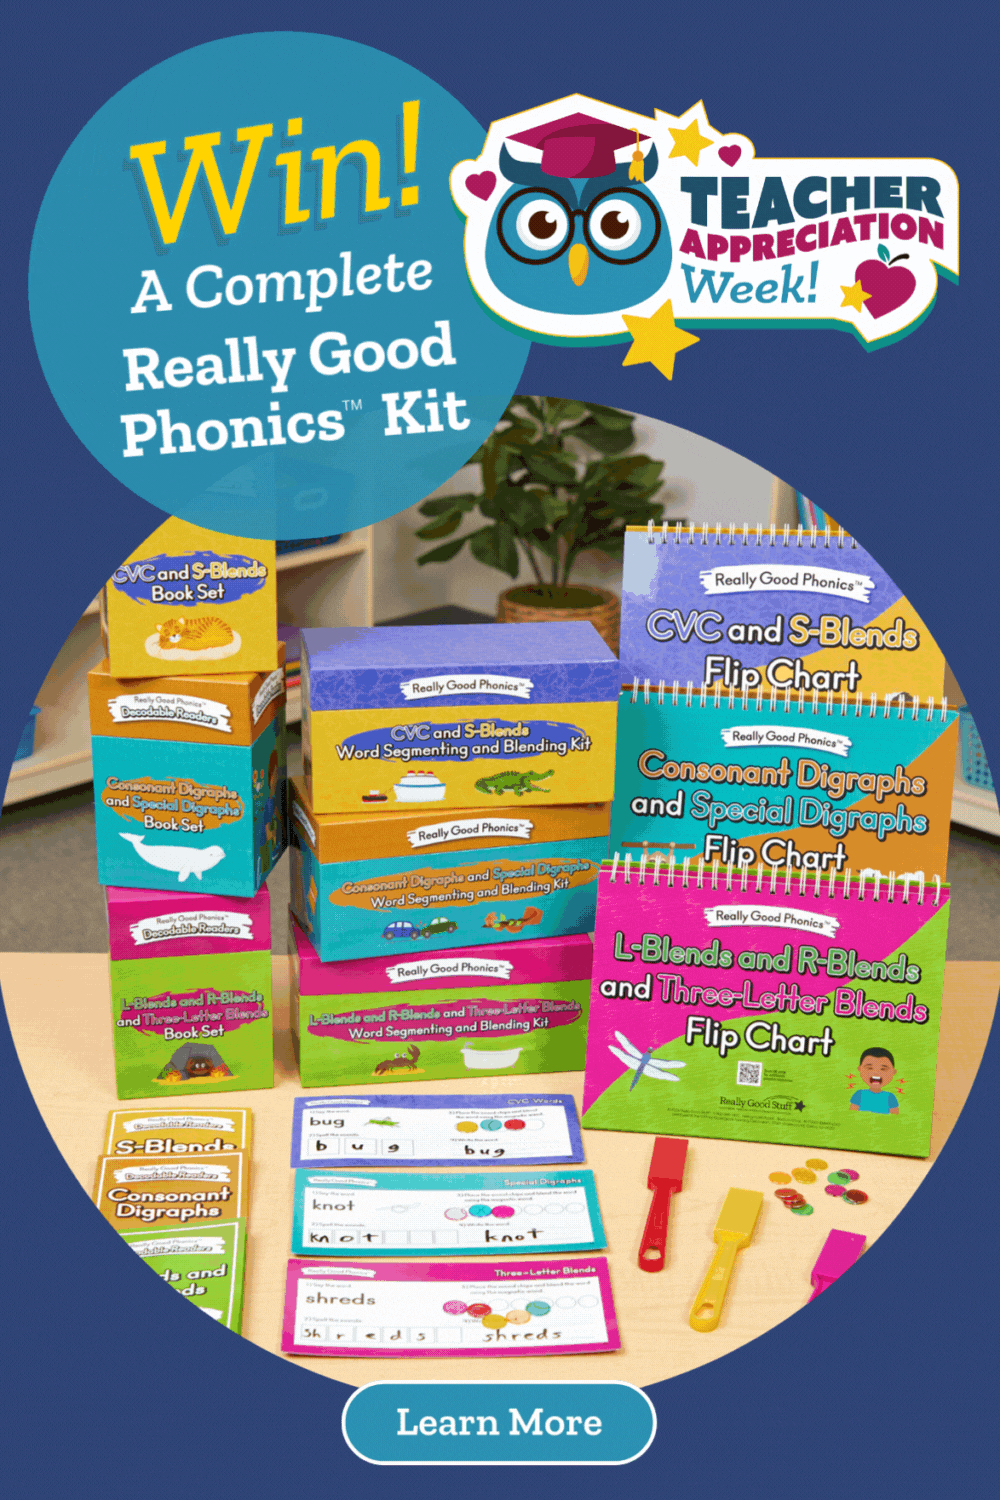 Win a Complete Really Good Phonics Kit